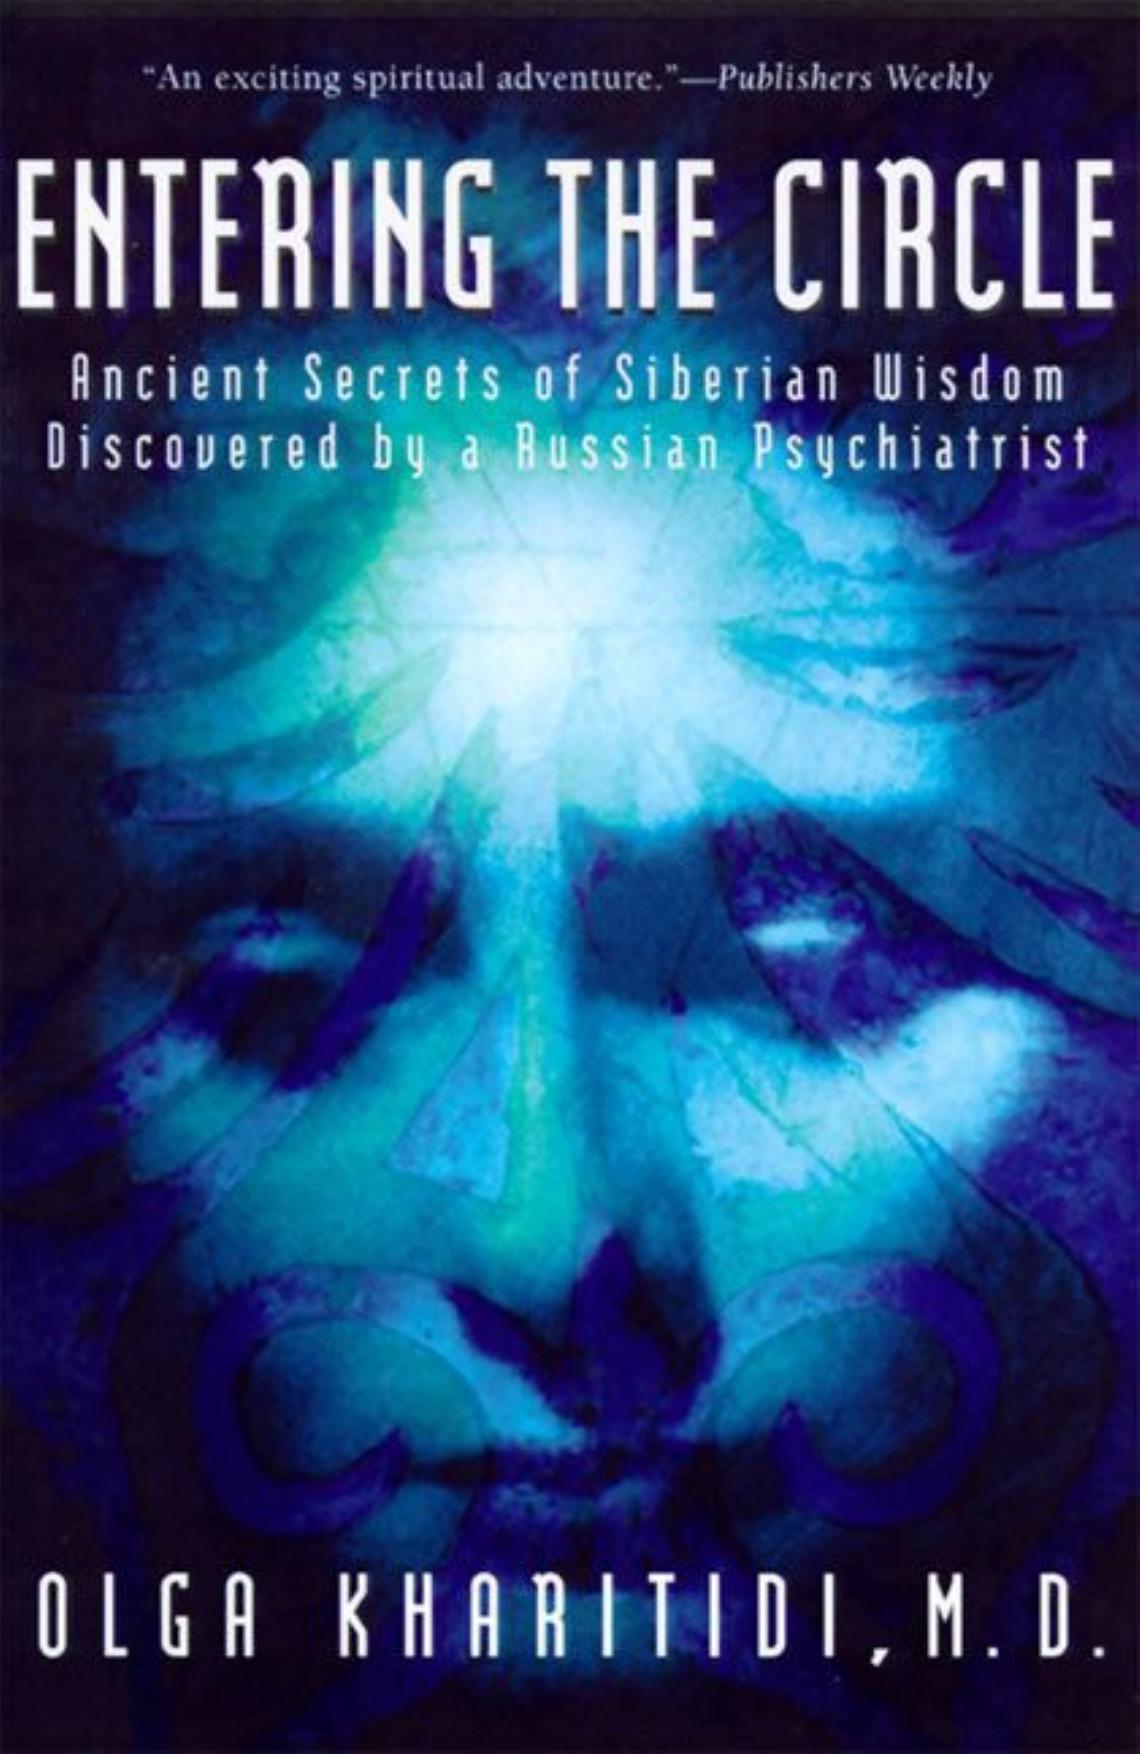 Entering the Circle: Ancient Secrets of Siberian Wisdom Discovered by a Russian Psychiatrist